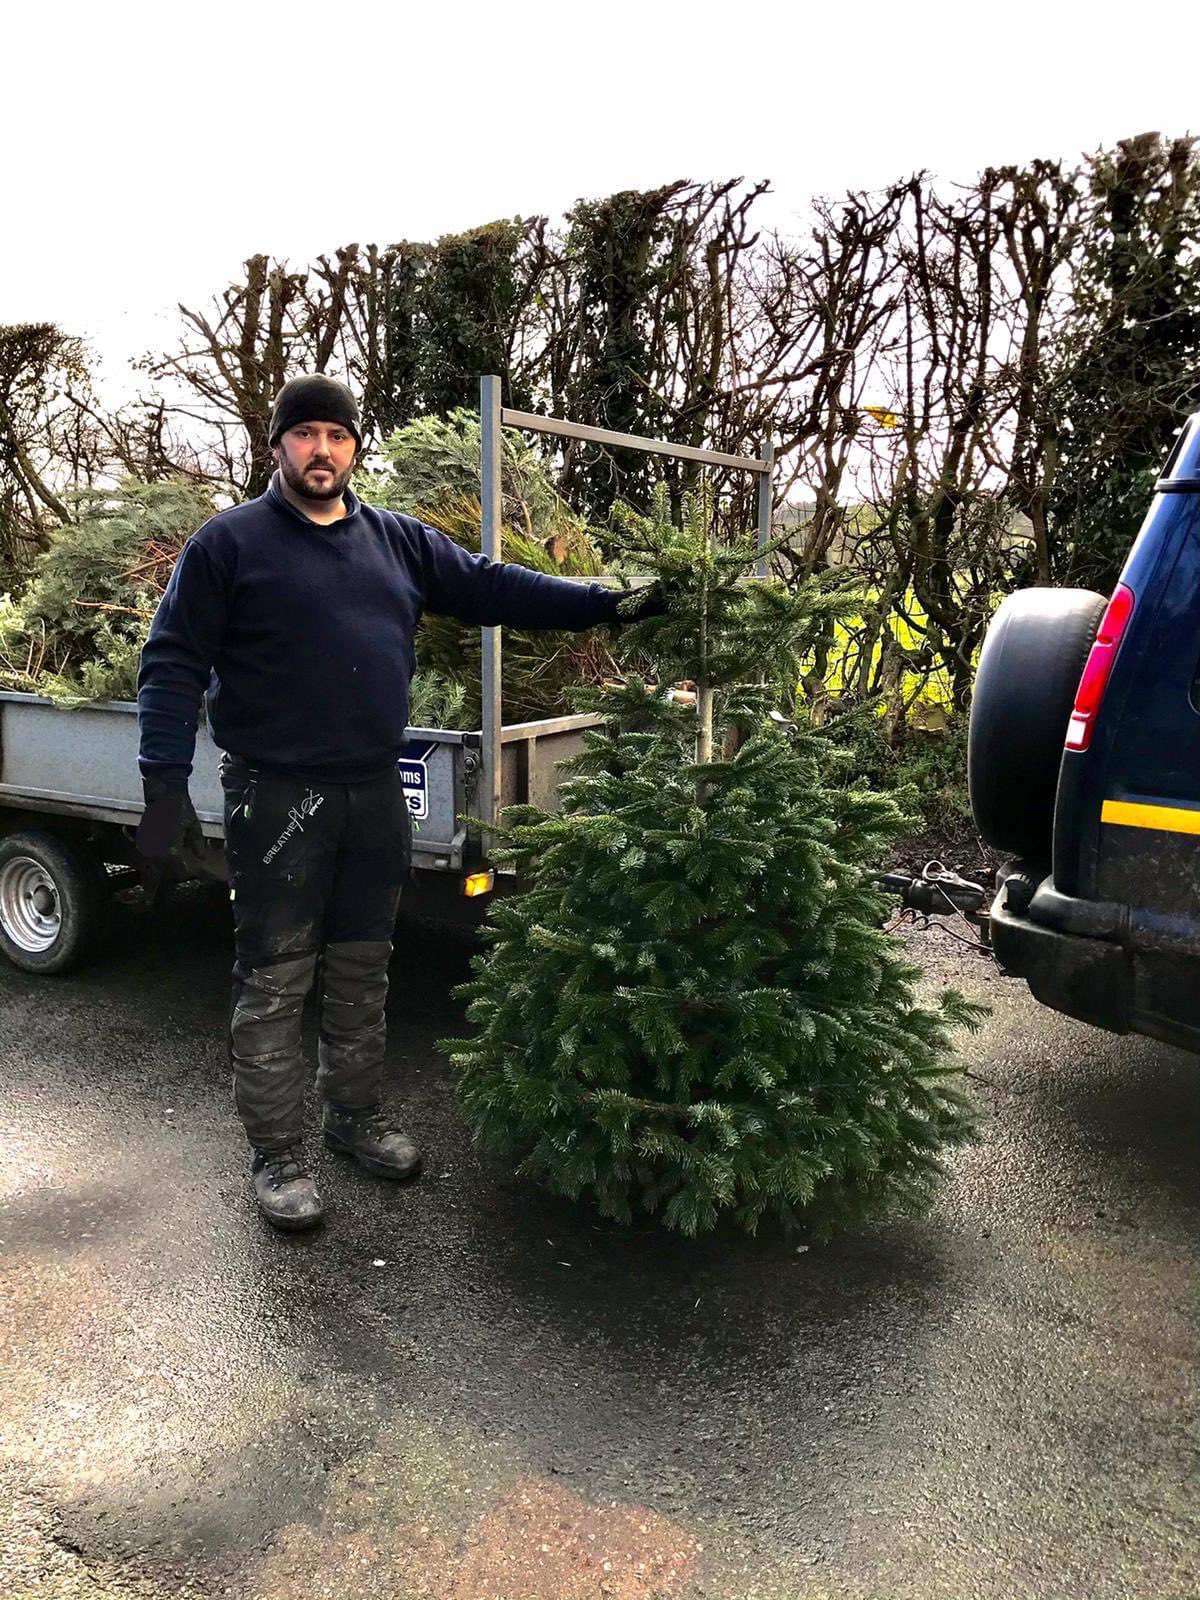 NEWS | Christmas Tree collection raises £10,000 for St Michael’s Hospice